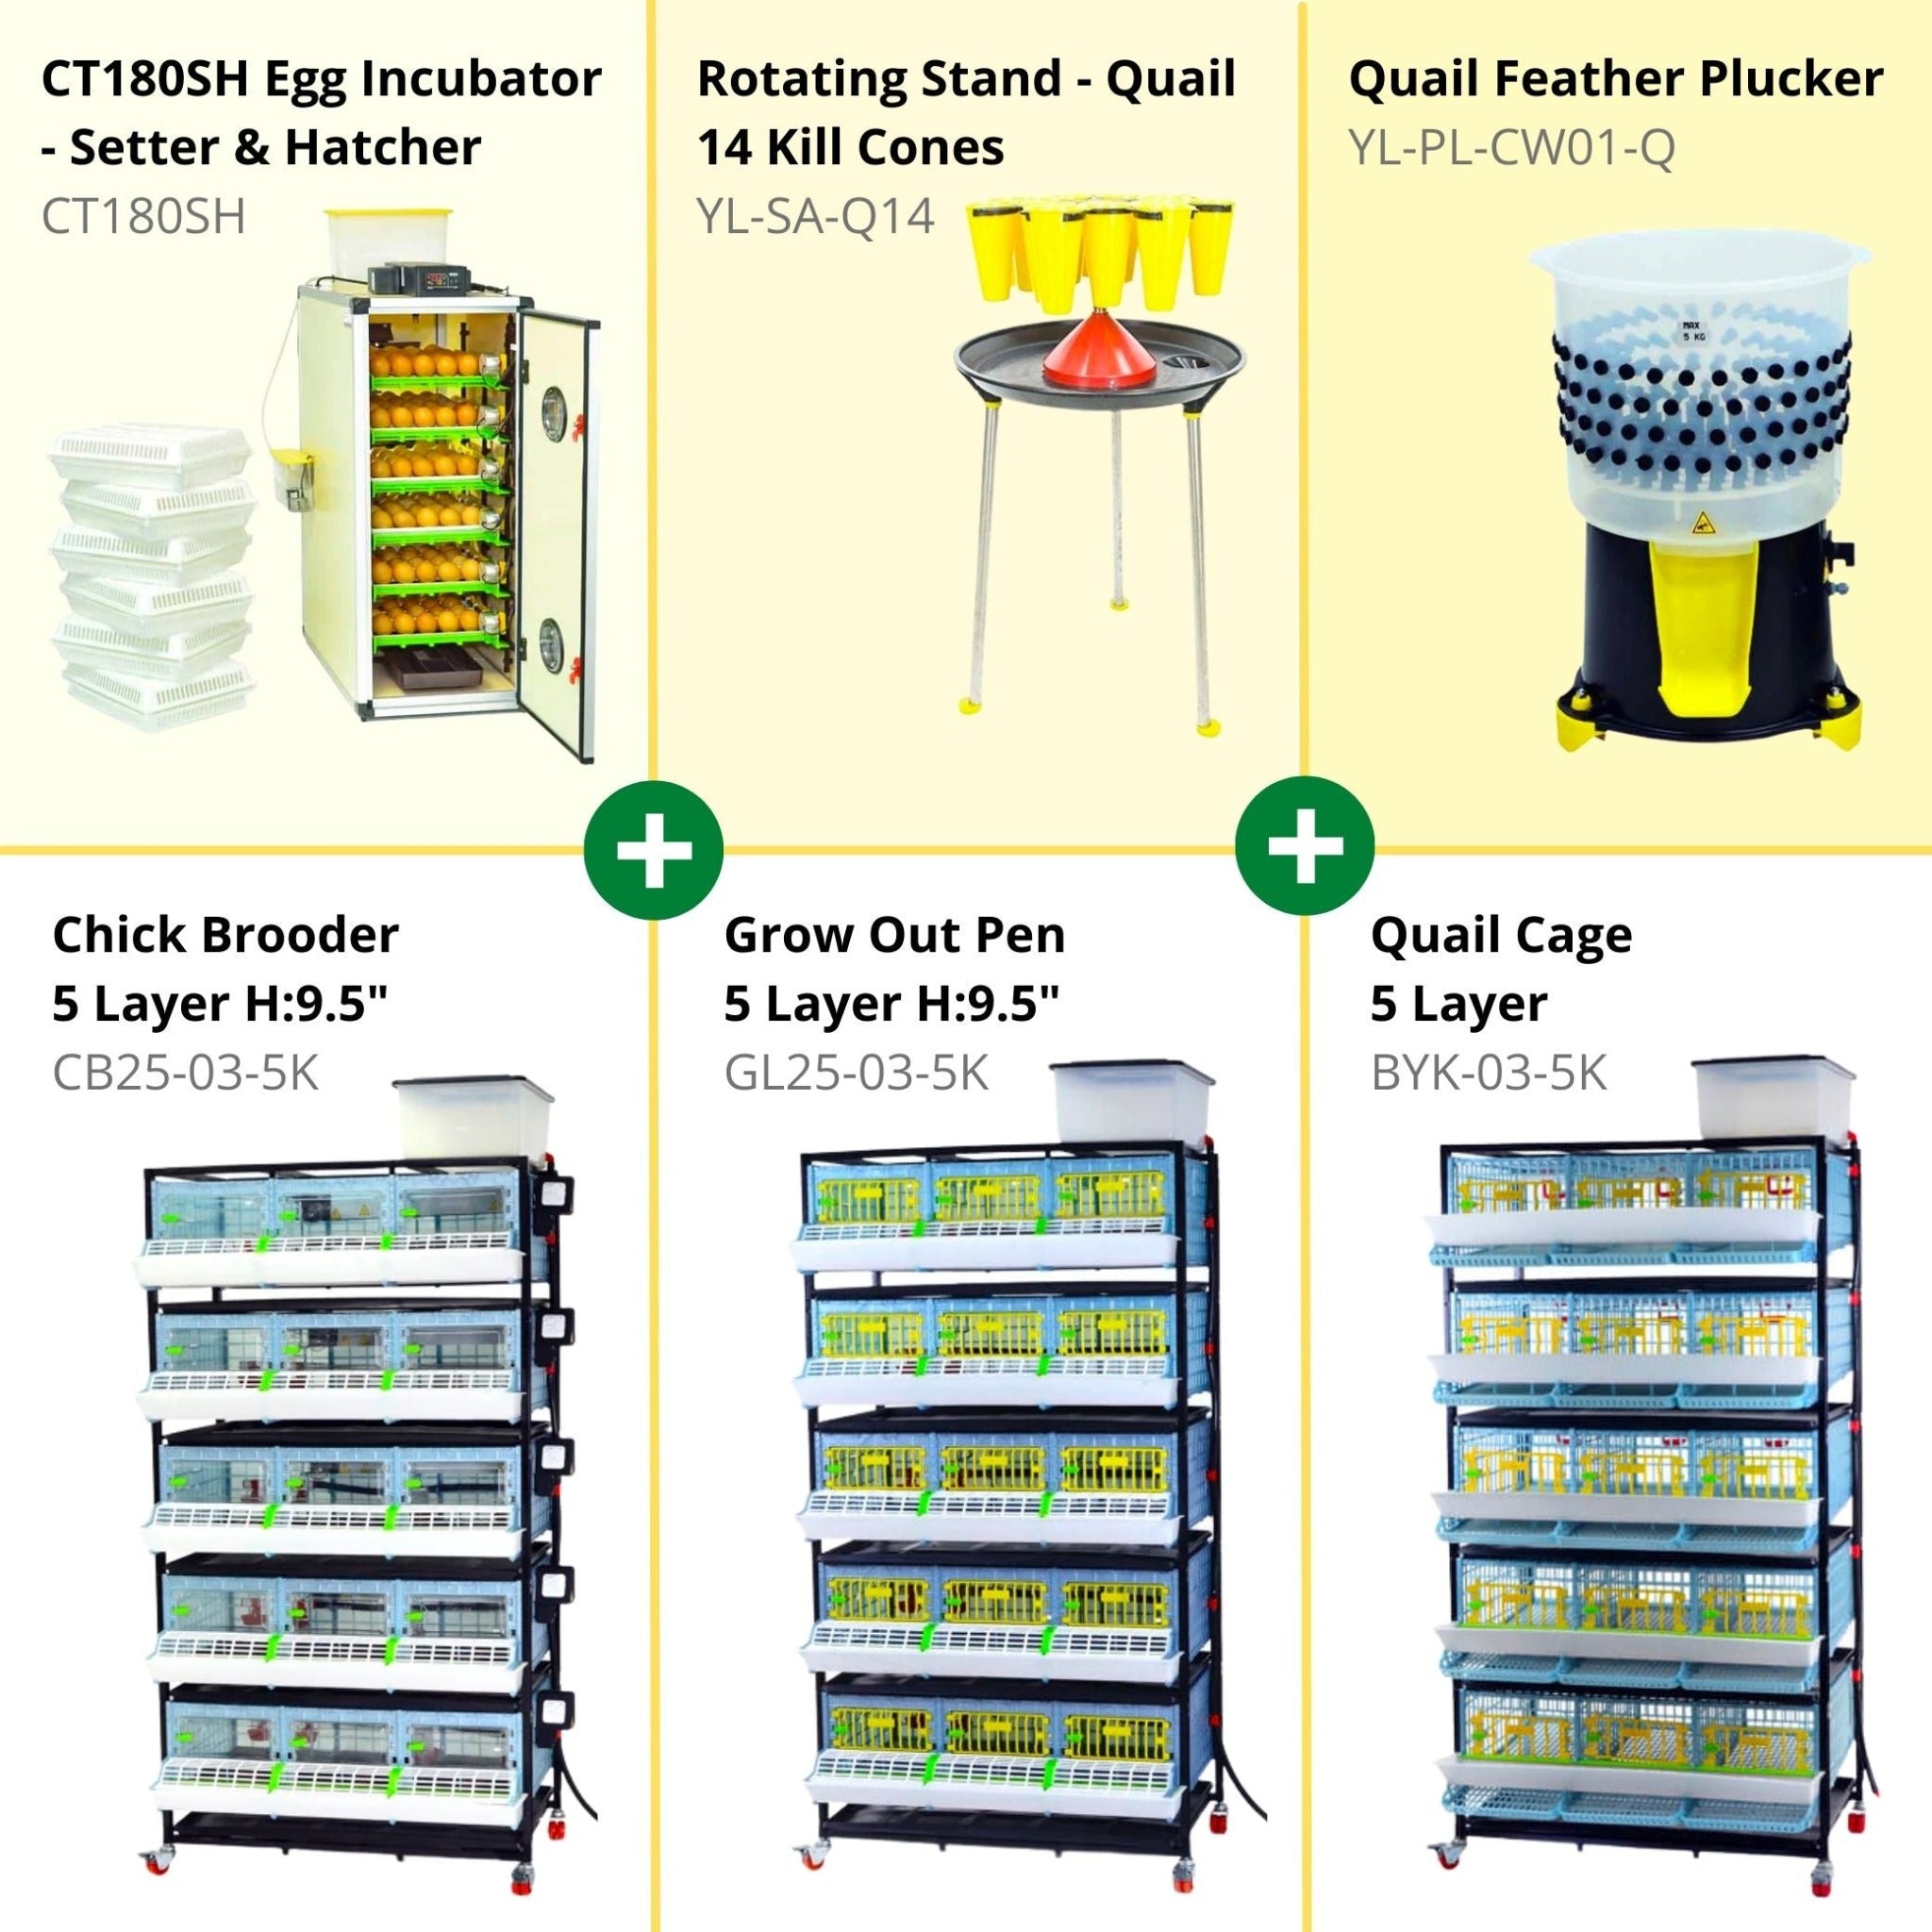 Infographic showing all included items. CT180 Egg Incubator-Setter and Hatcher, Rotating Stand 14 Quail Kill Cones, Quail Feather plucker, 5 Layer Chick Brooder, 5 Layer Grow out Pen 9.5 Inch, 5 Layer Quail Cage.